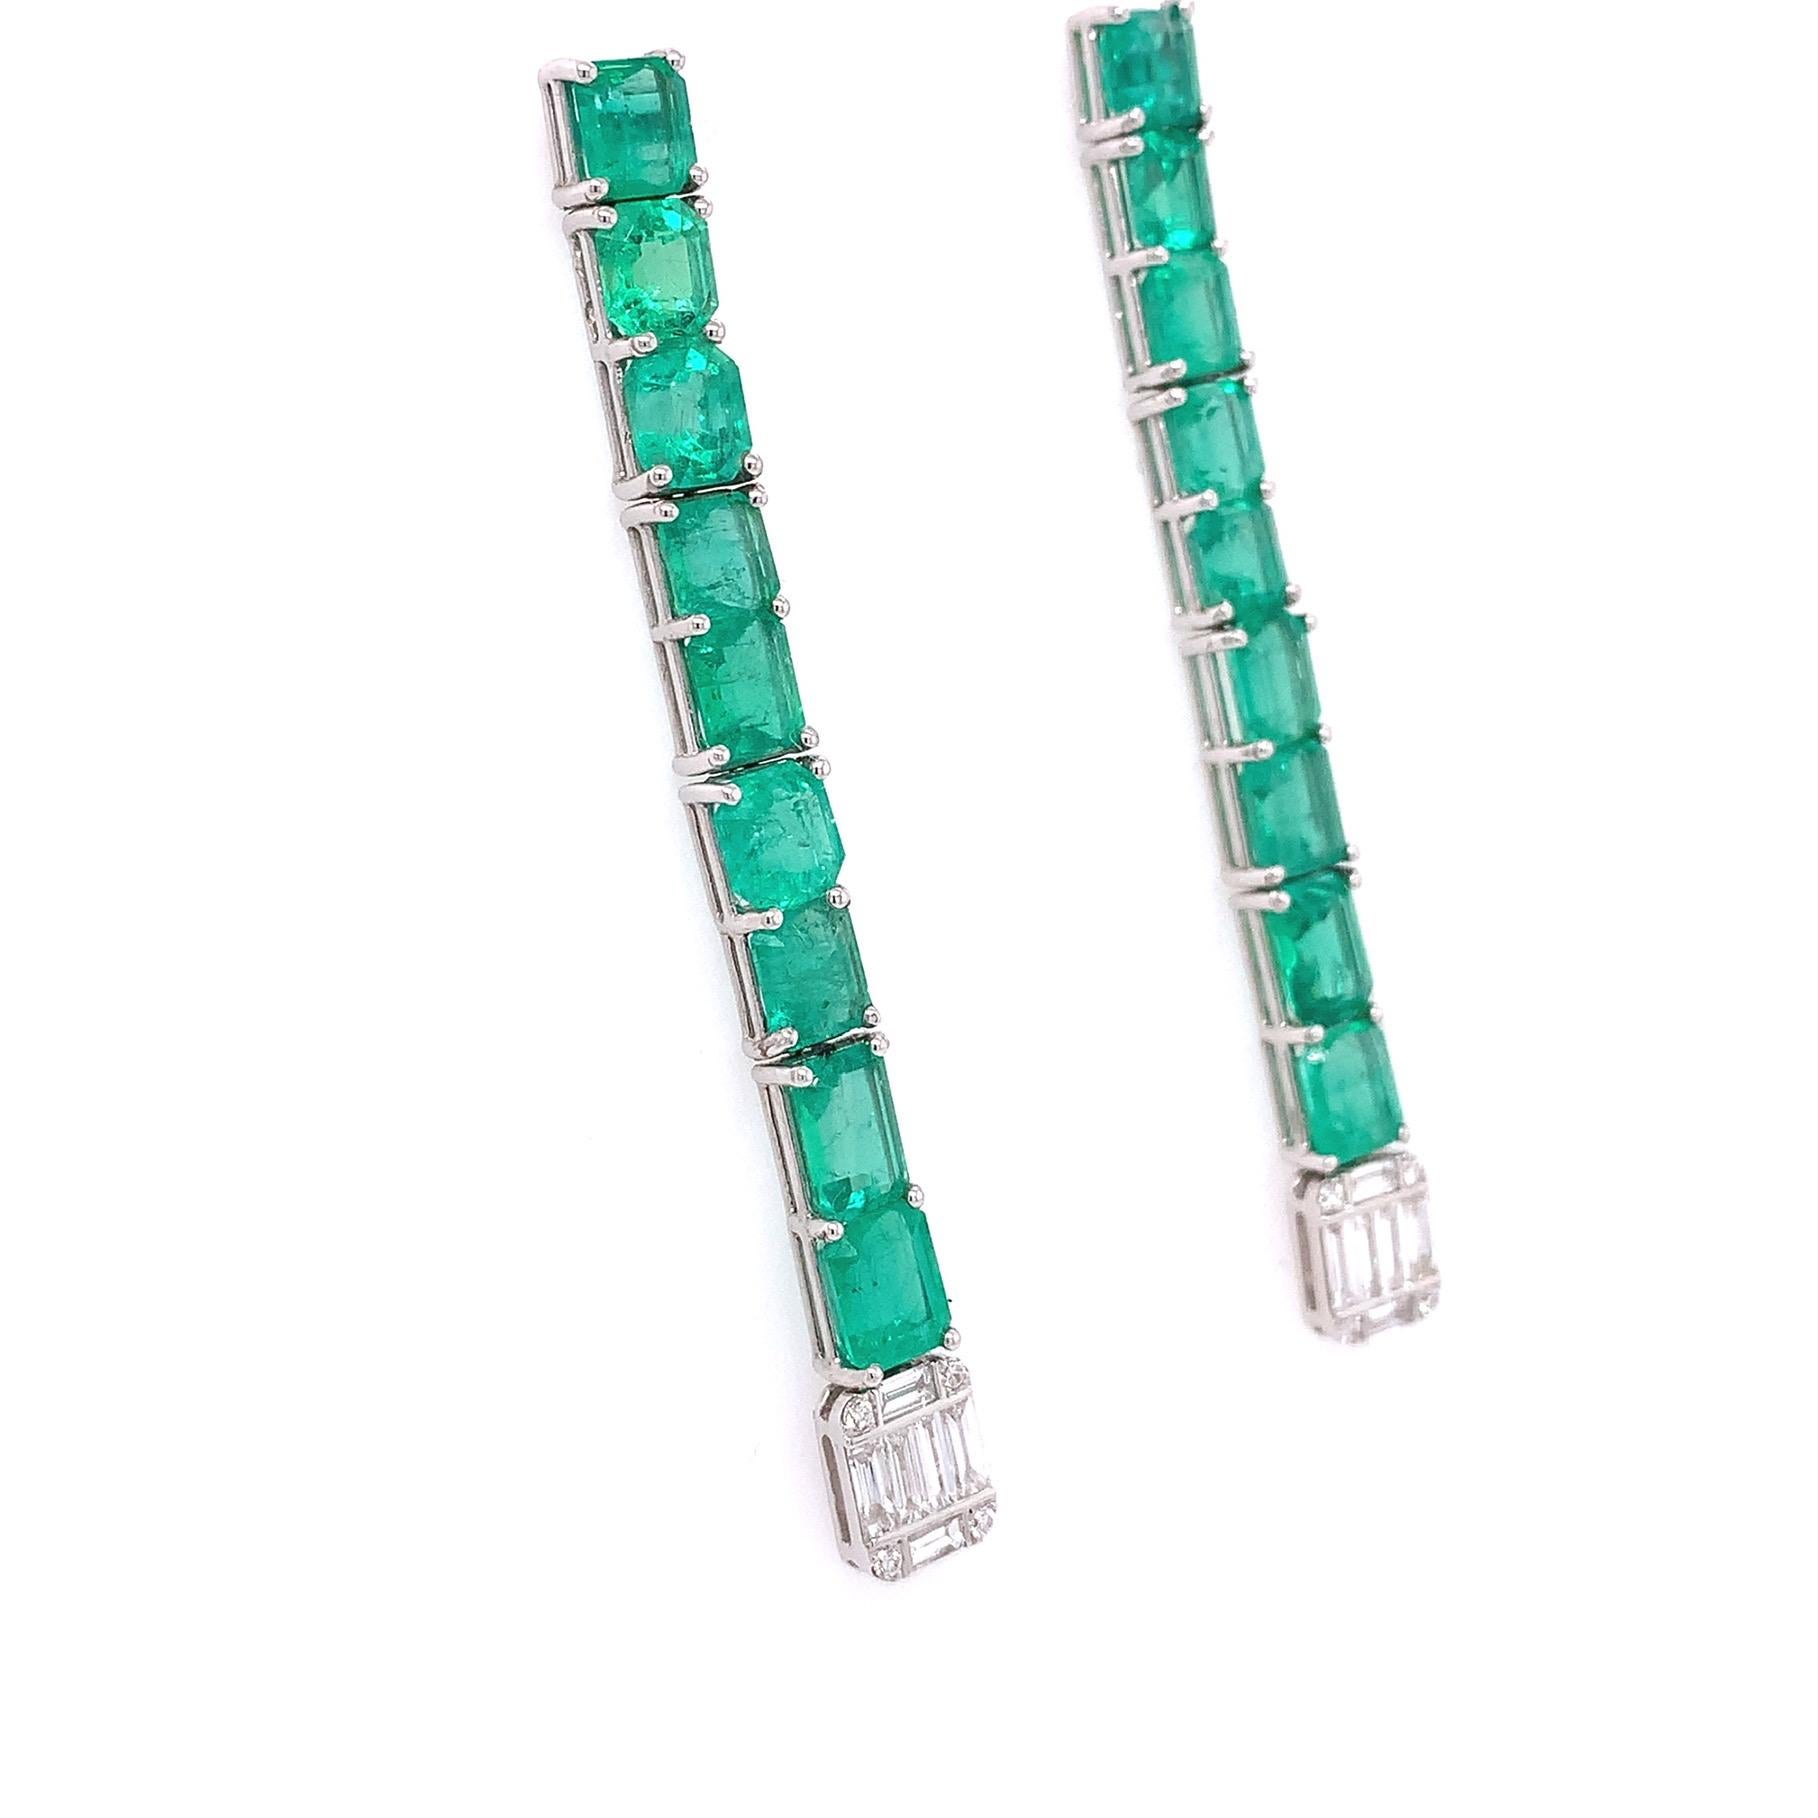 Jardin Collection,

Linear Emerald and Diamond earrings all set in 18k white gold.

Emerald: 9.61ct total weight.
Diamond: 0.86ct total weight.
All diamonds are G-H/SI stones.